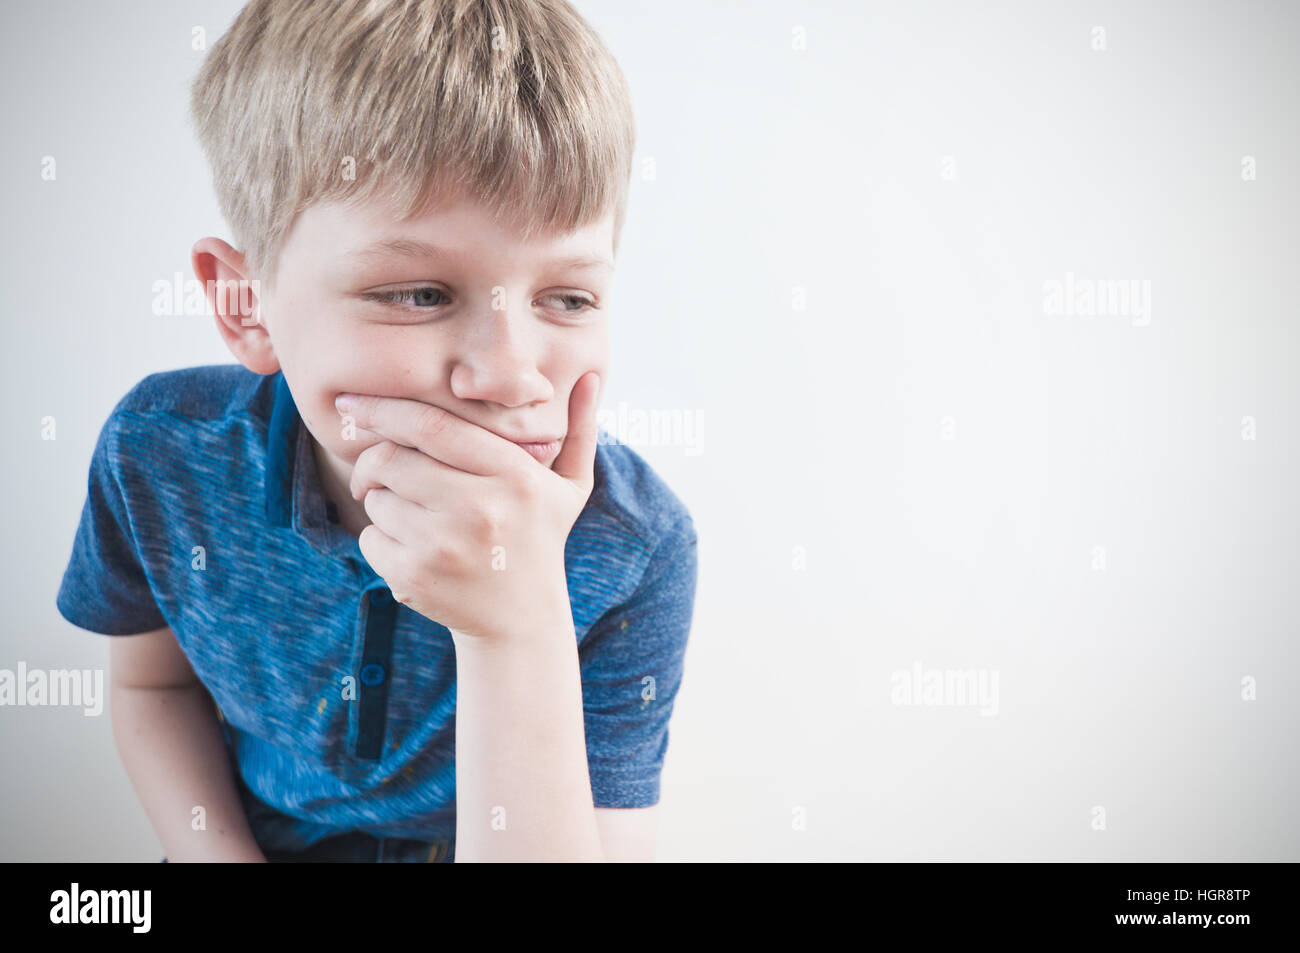 Worried child deep in thought copy space to the right of the image Stock Photo